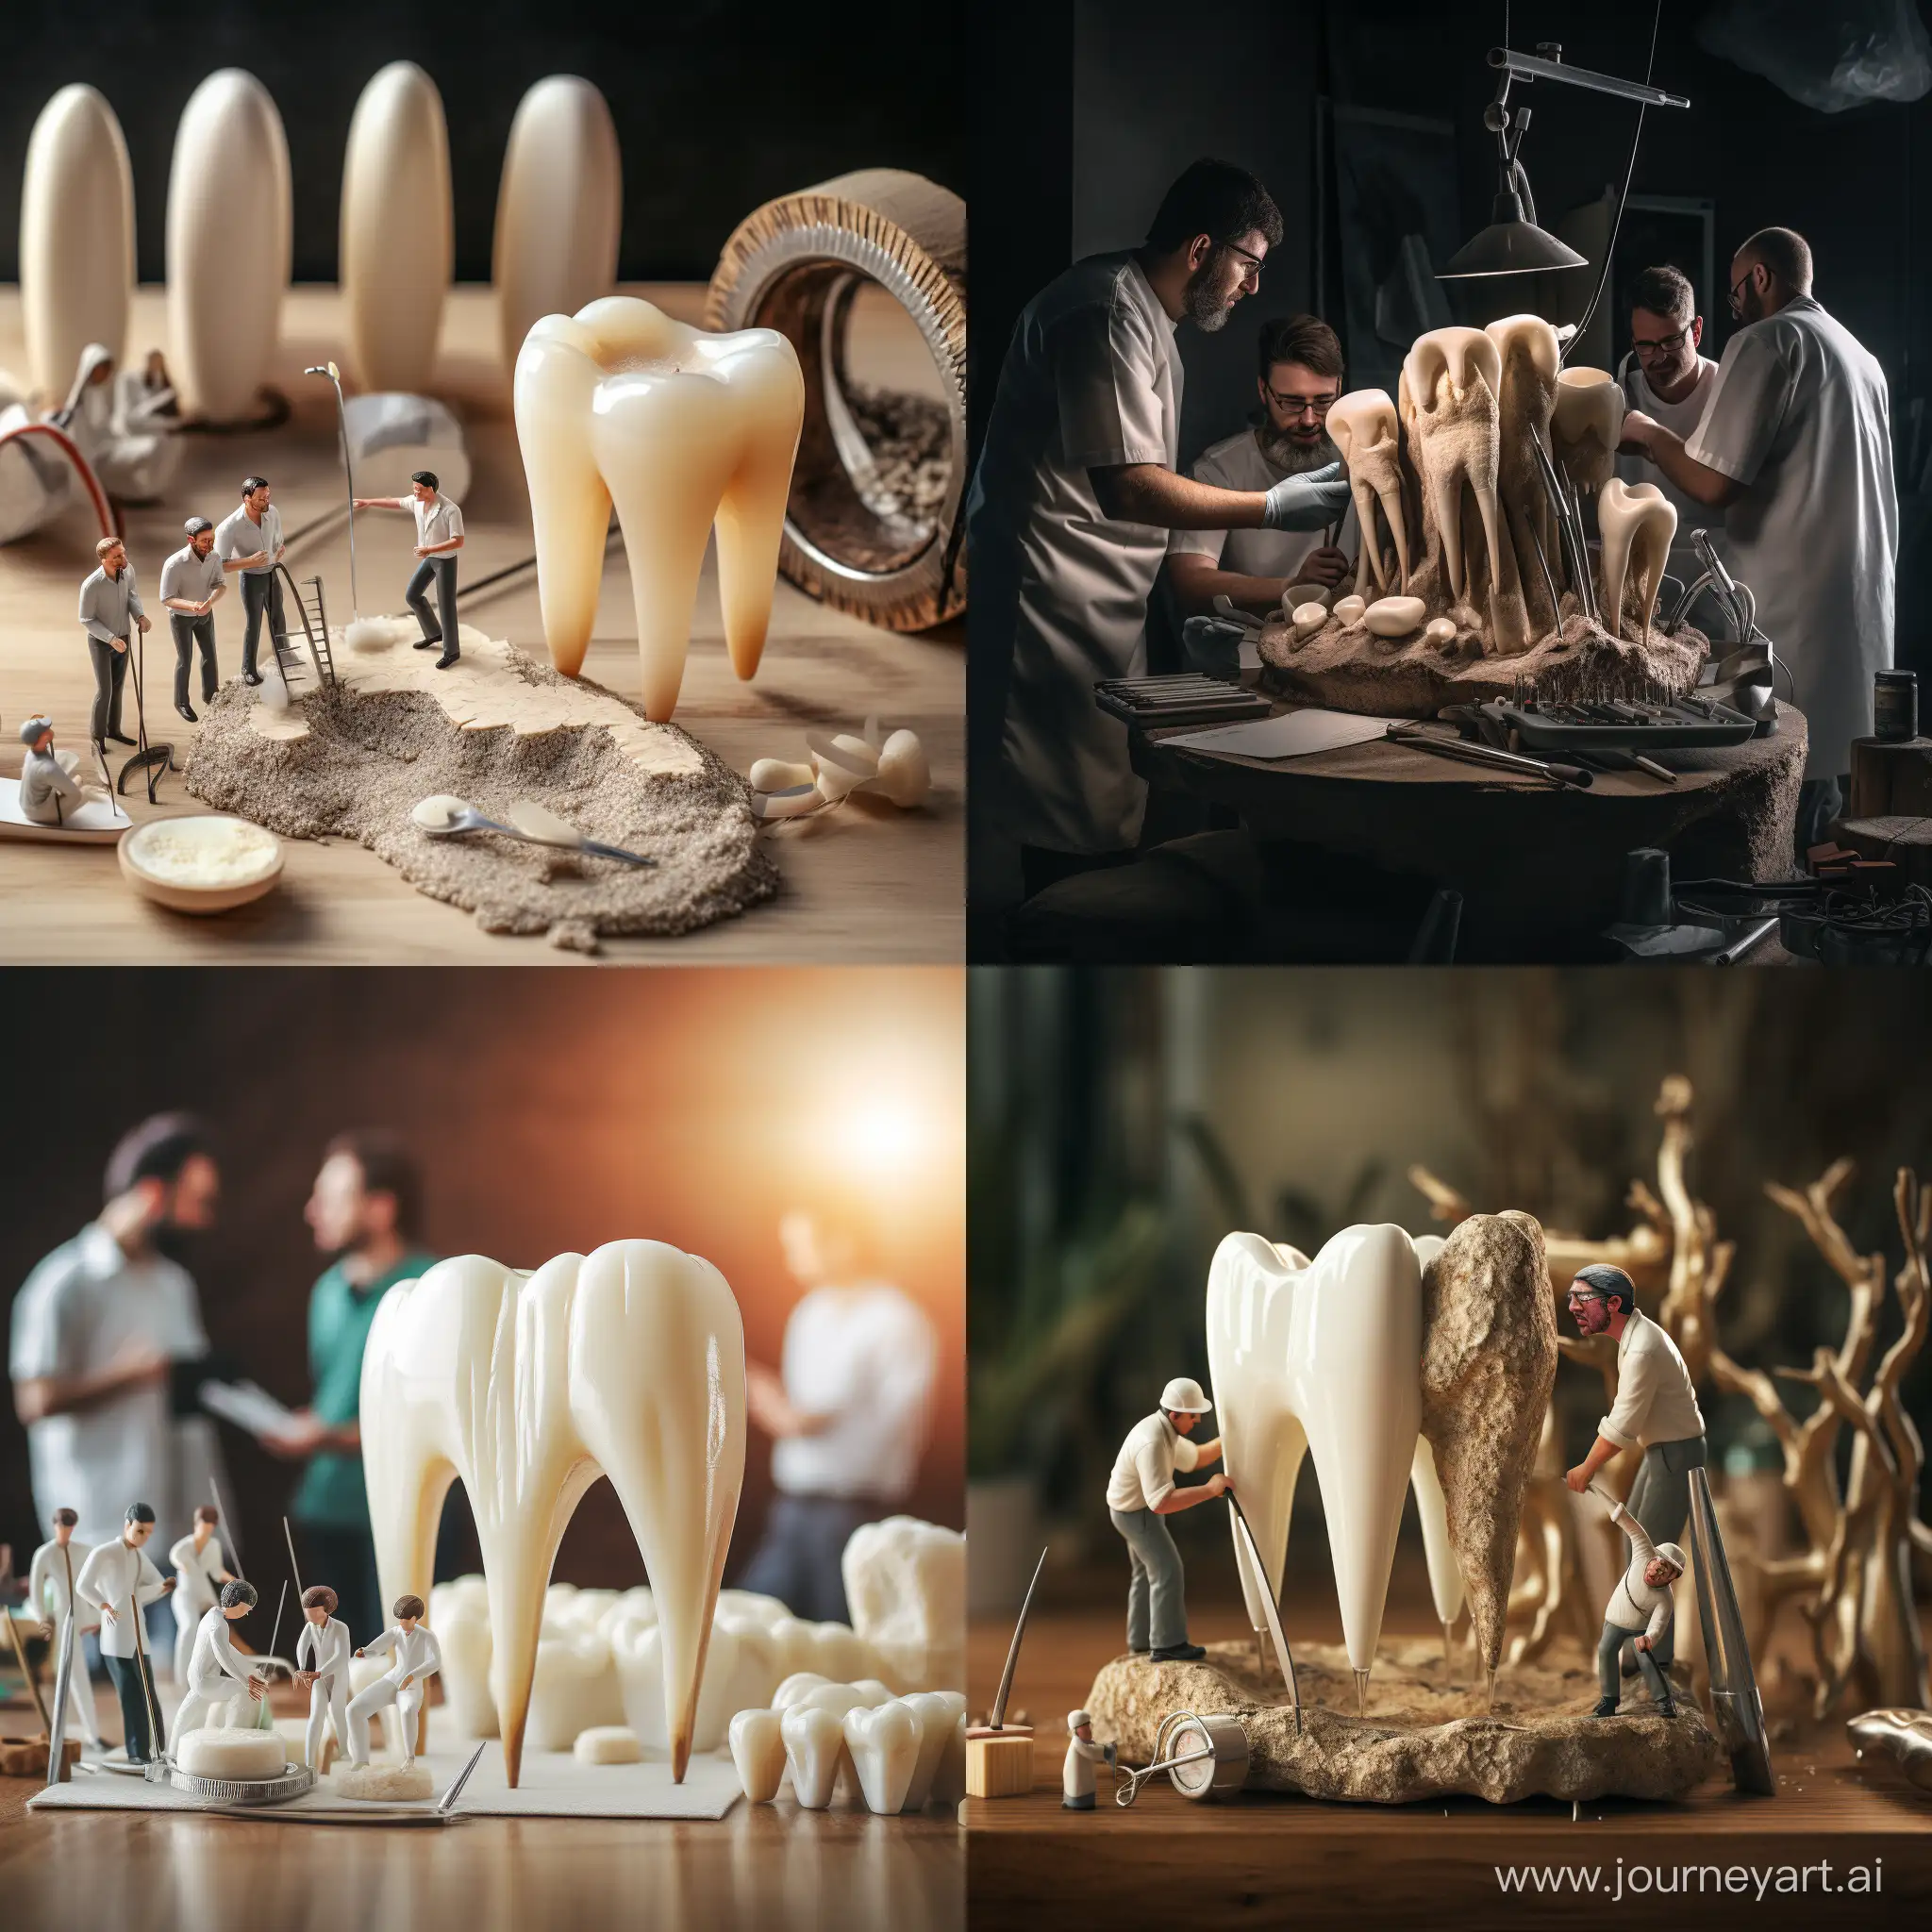 Professional-Dentists-Examining-a-Human-Tooth-on-Table-4K-Dental-Image